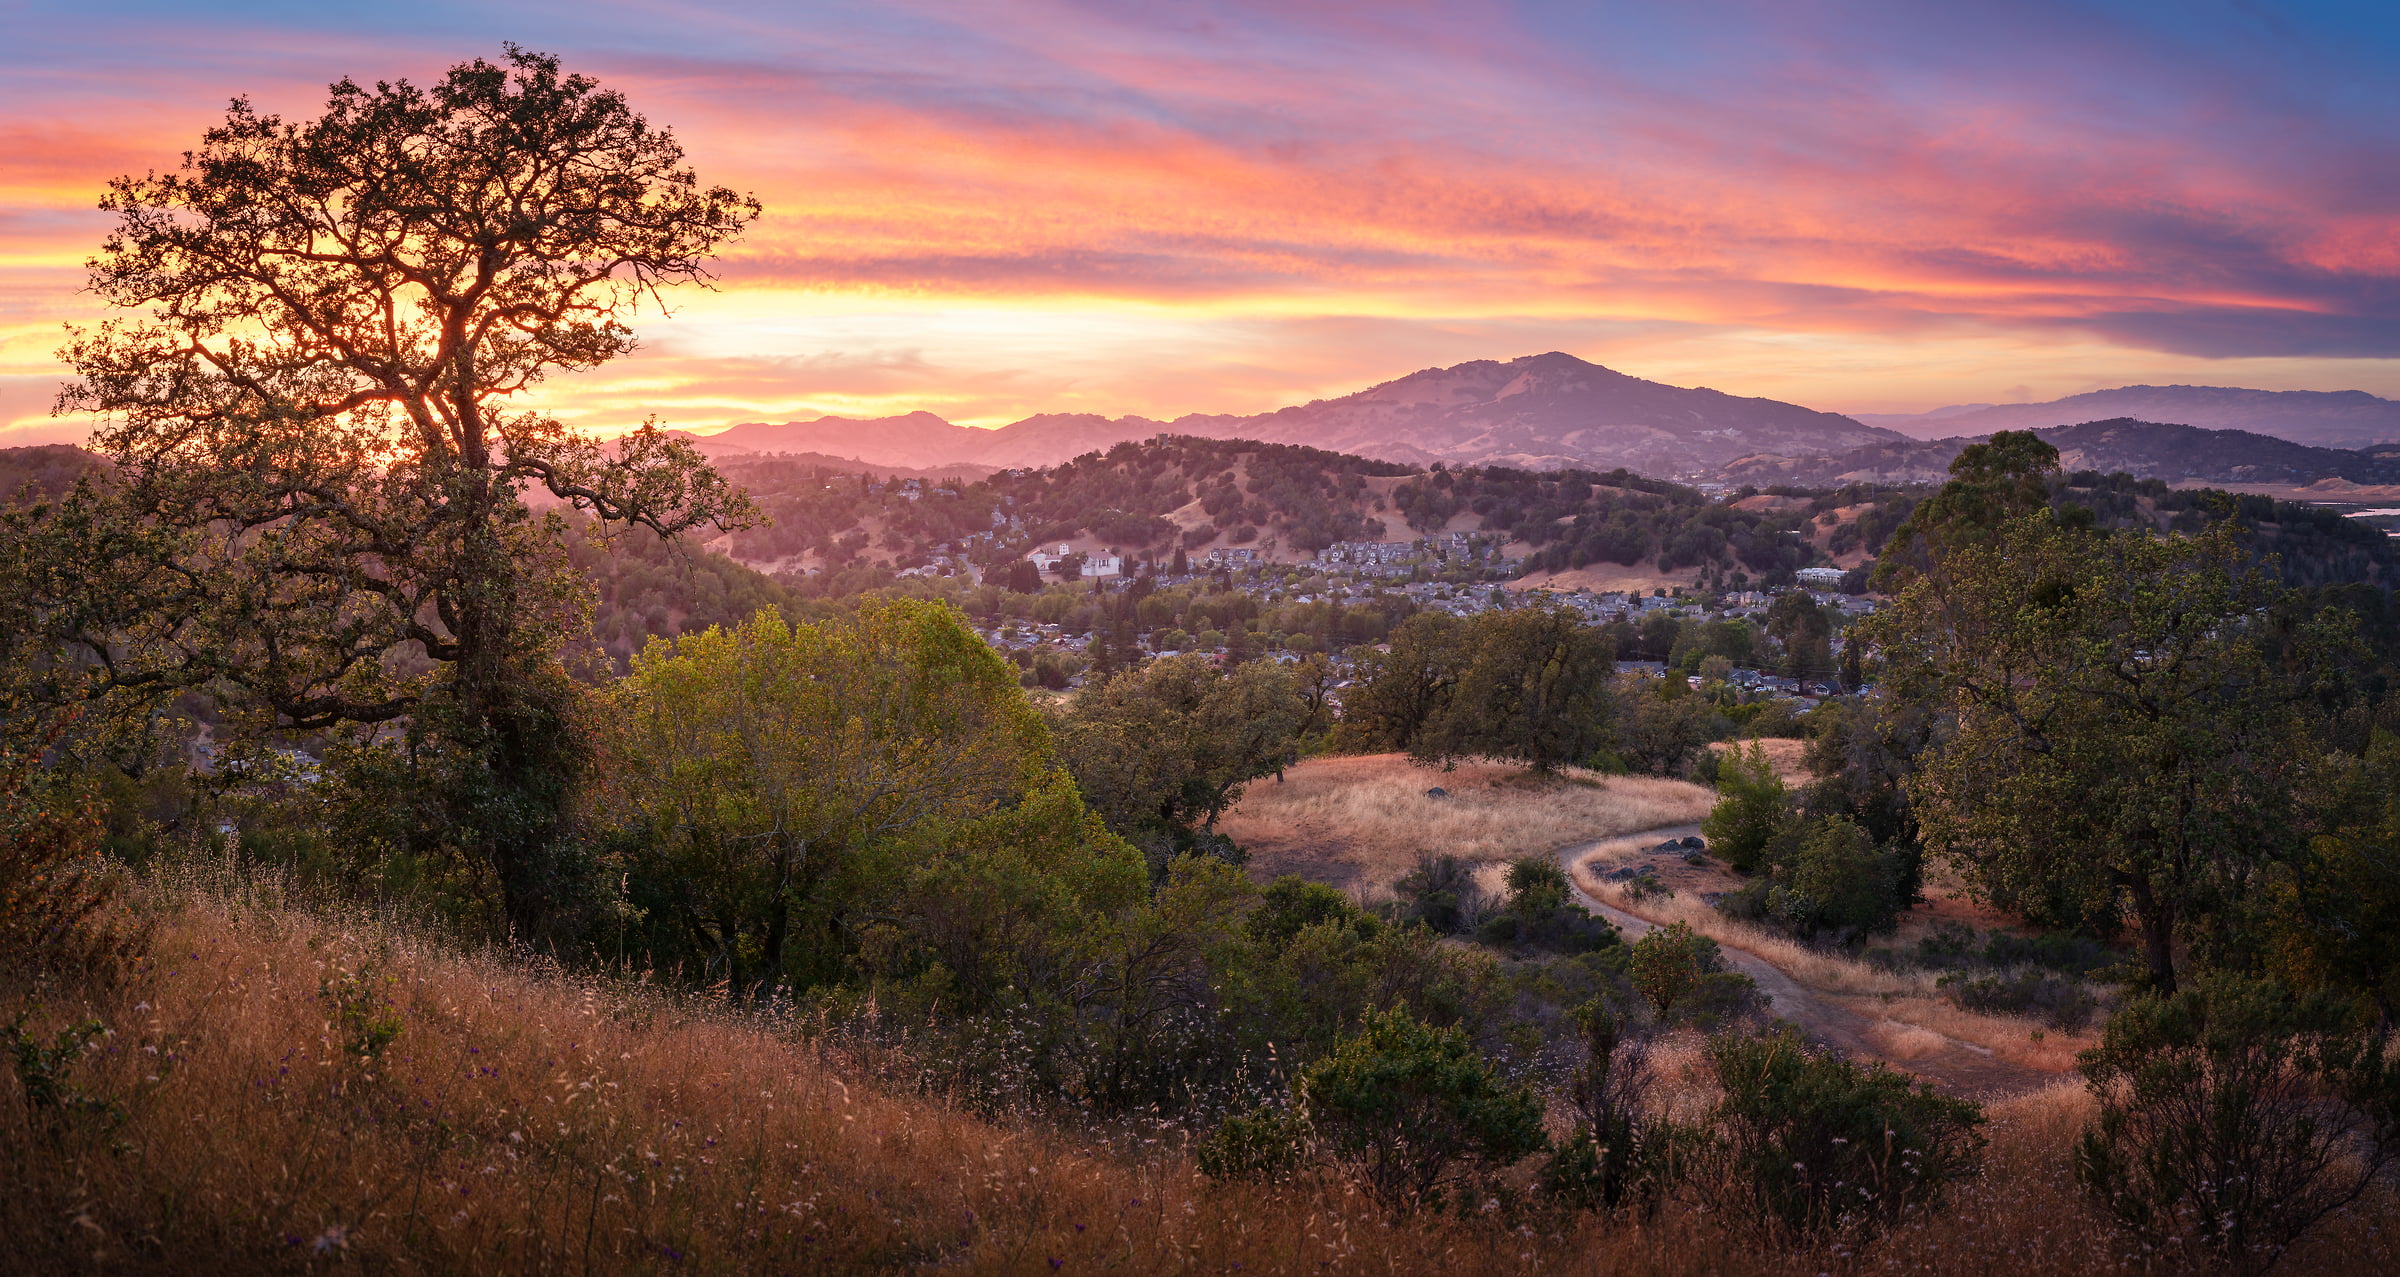 184 megapixels! A very high resolution, large-format VAST photo print of sunset in Novato, California; landscape photograph created by Jeff Lewis